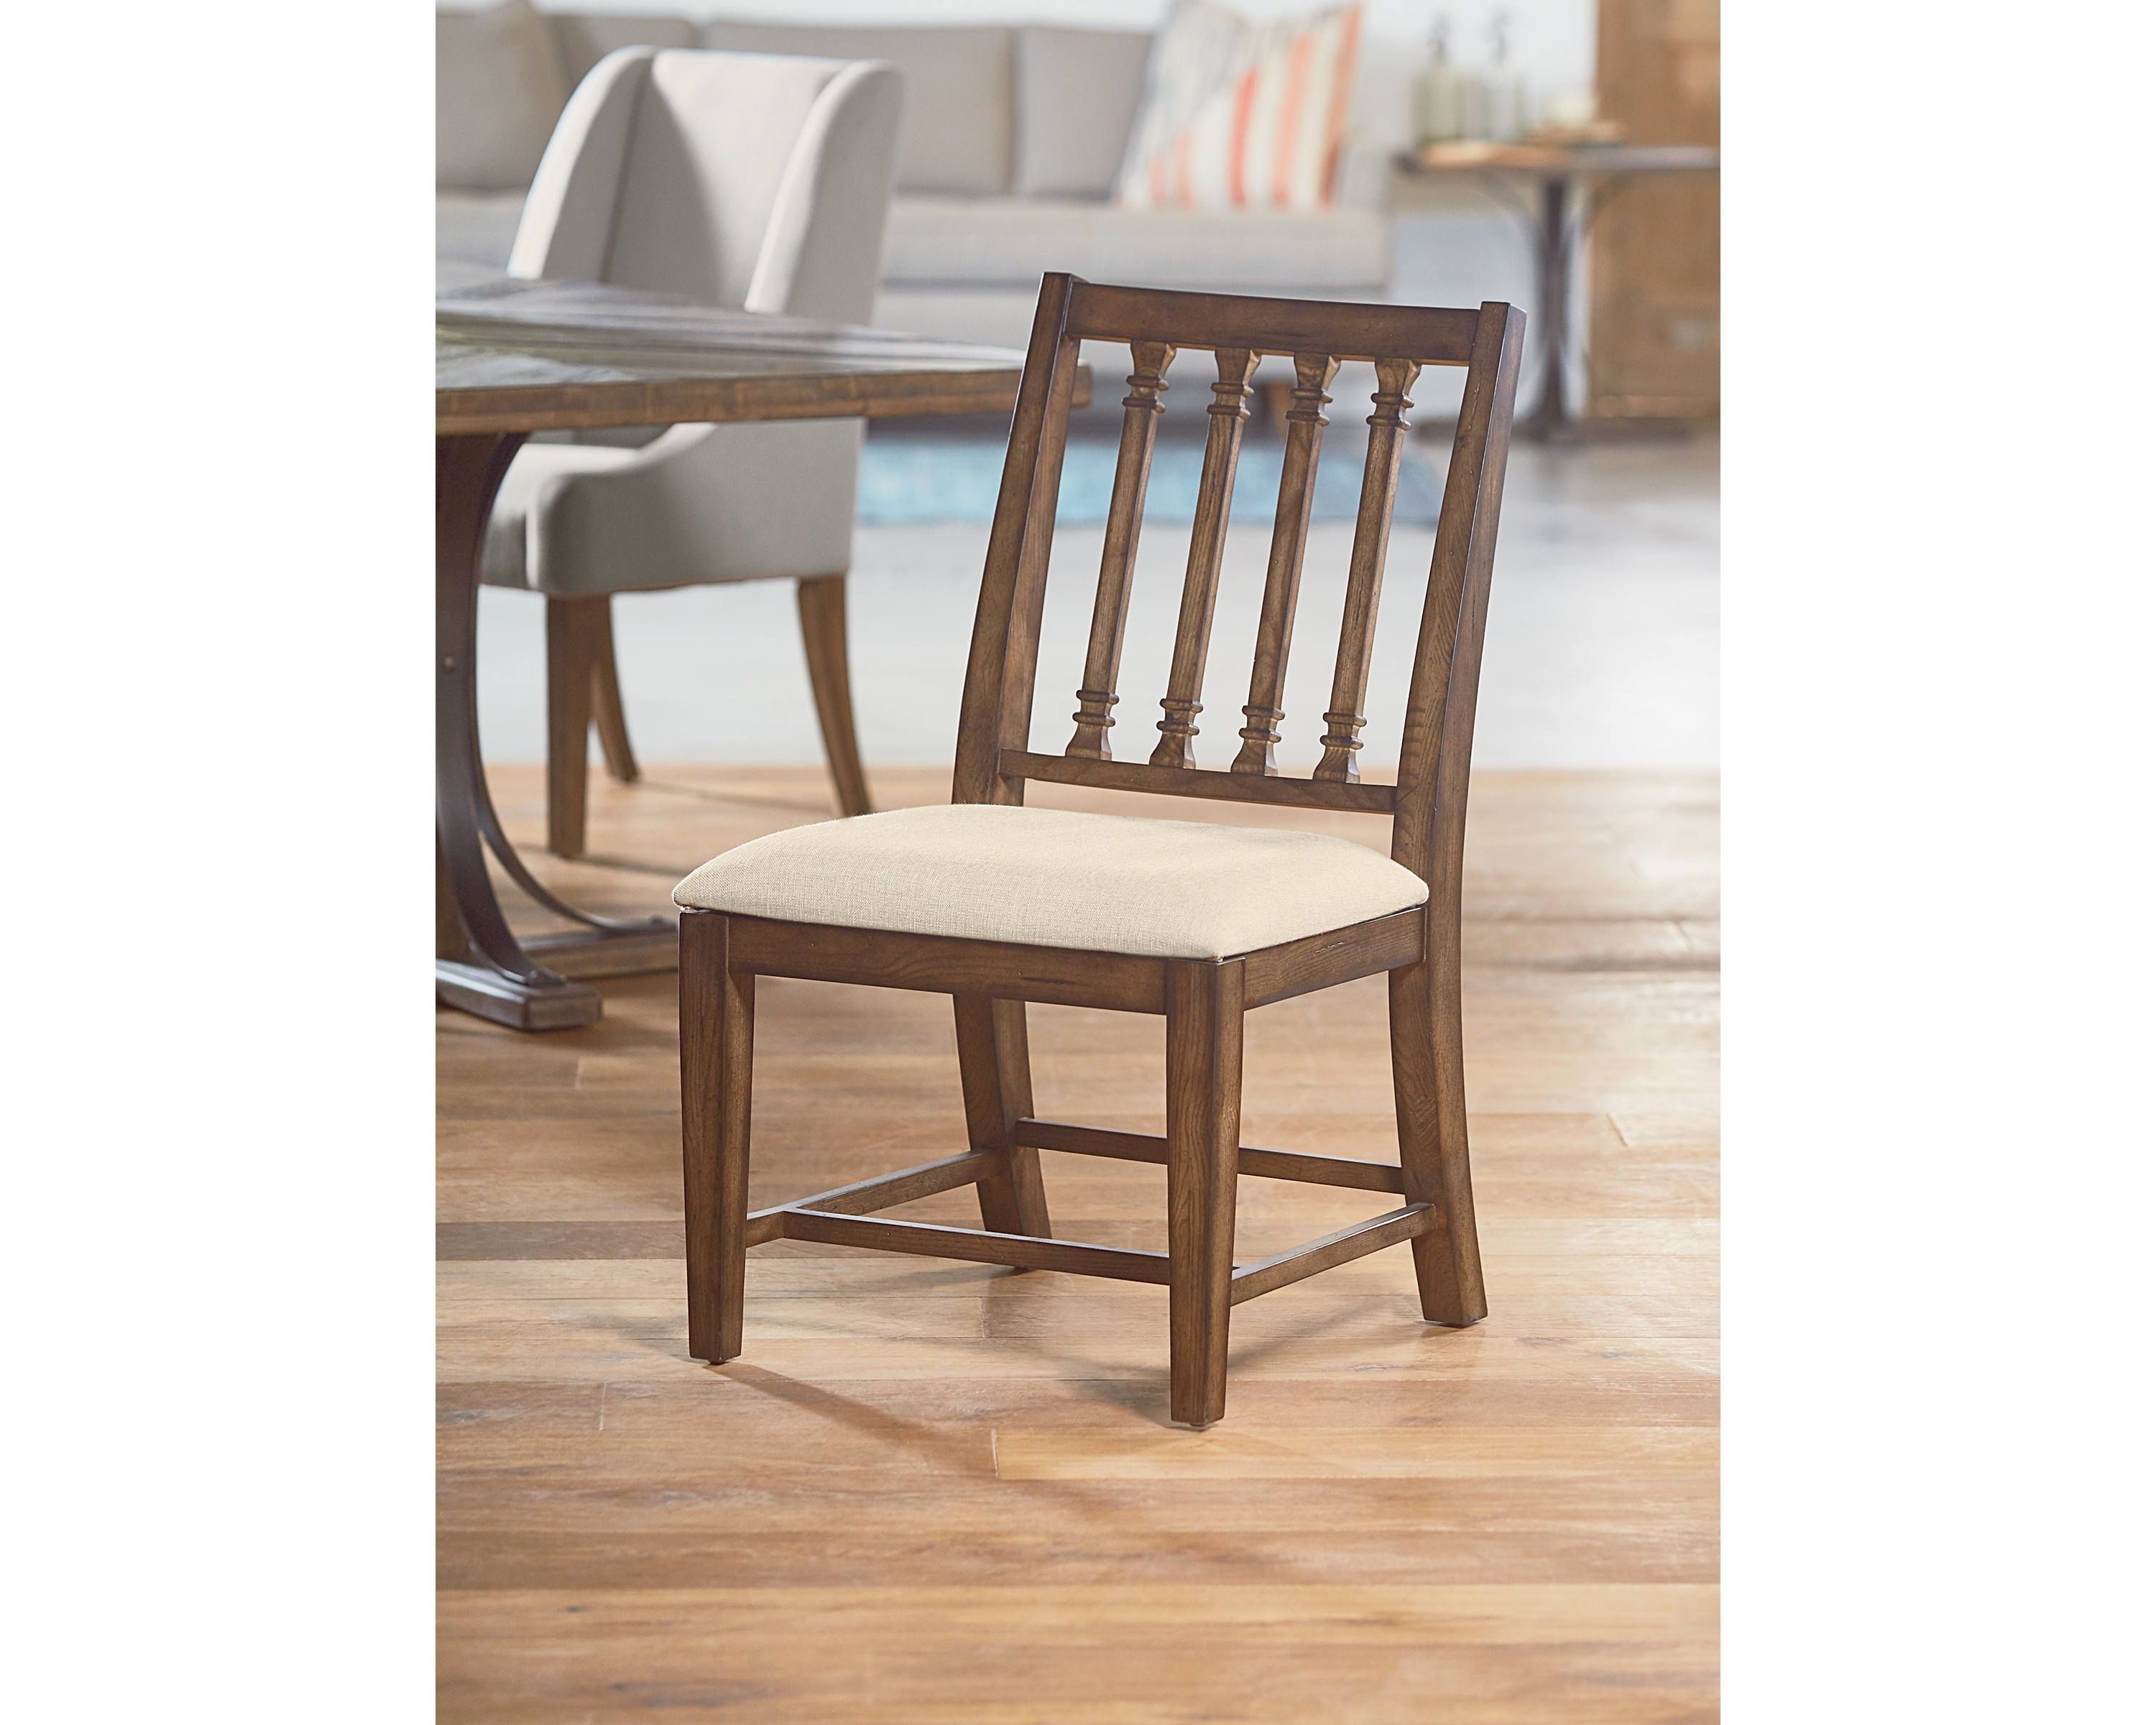 Magnolia Home Revival Side Chairs Intended For Best And Newest Revival Side Chair – Magnolia Home (View 12 of 20)